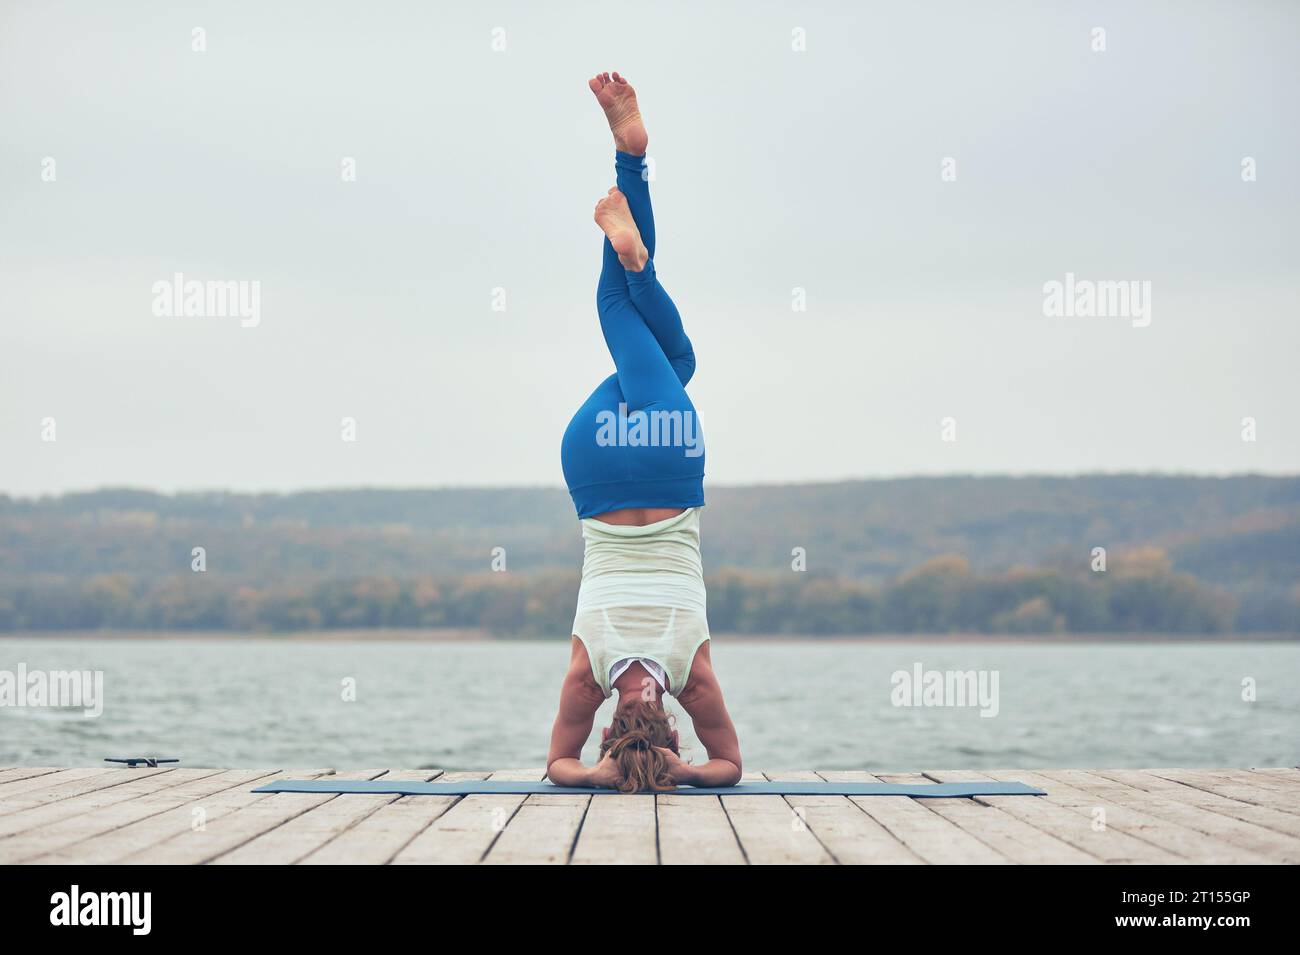 Beautiful young woman practices yoga asana Shirshasana - Headstand pose on the wooden deck near the lake. Stock Photo